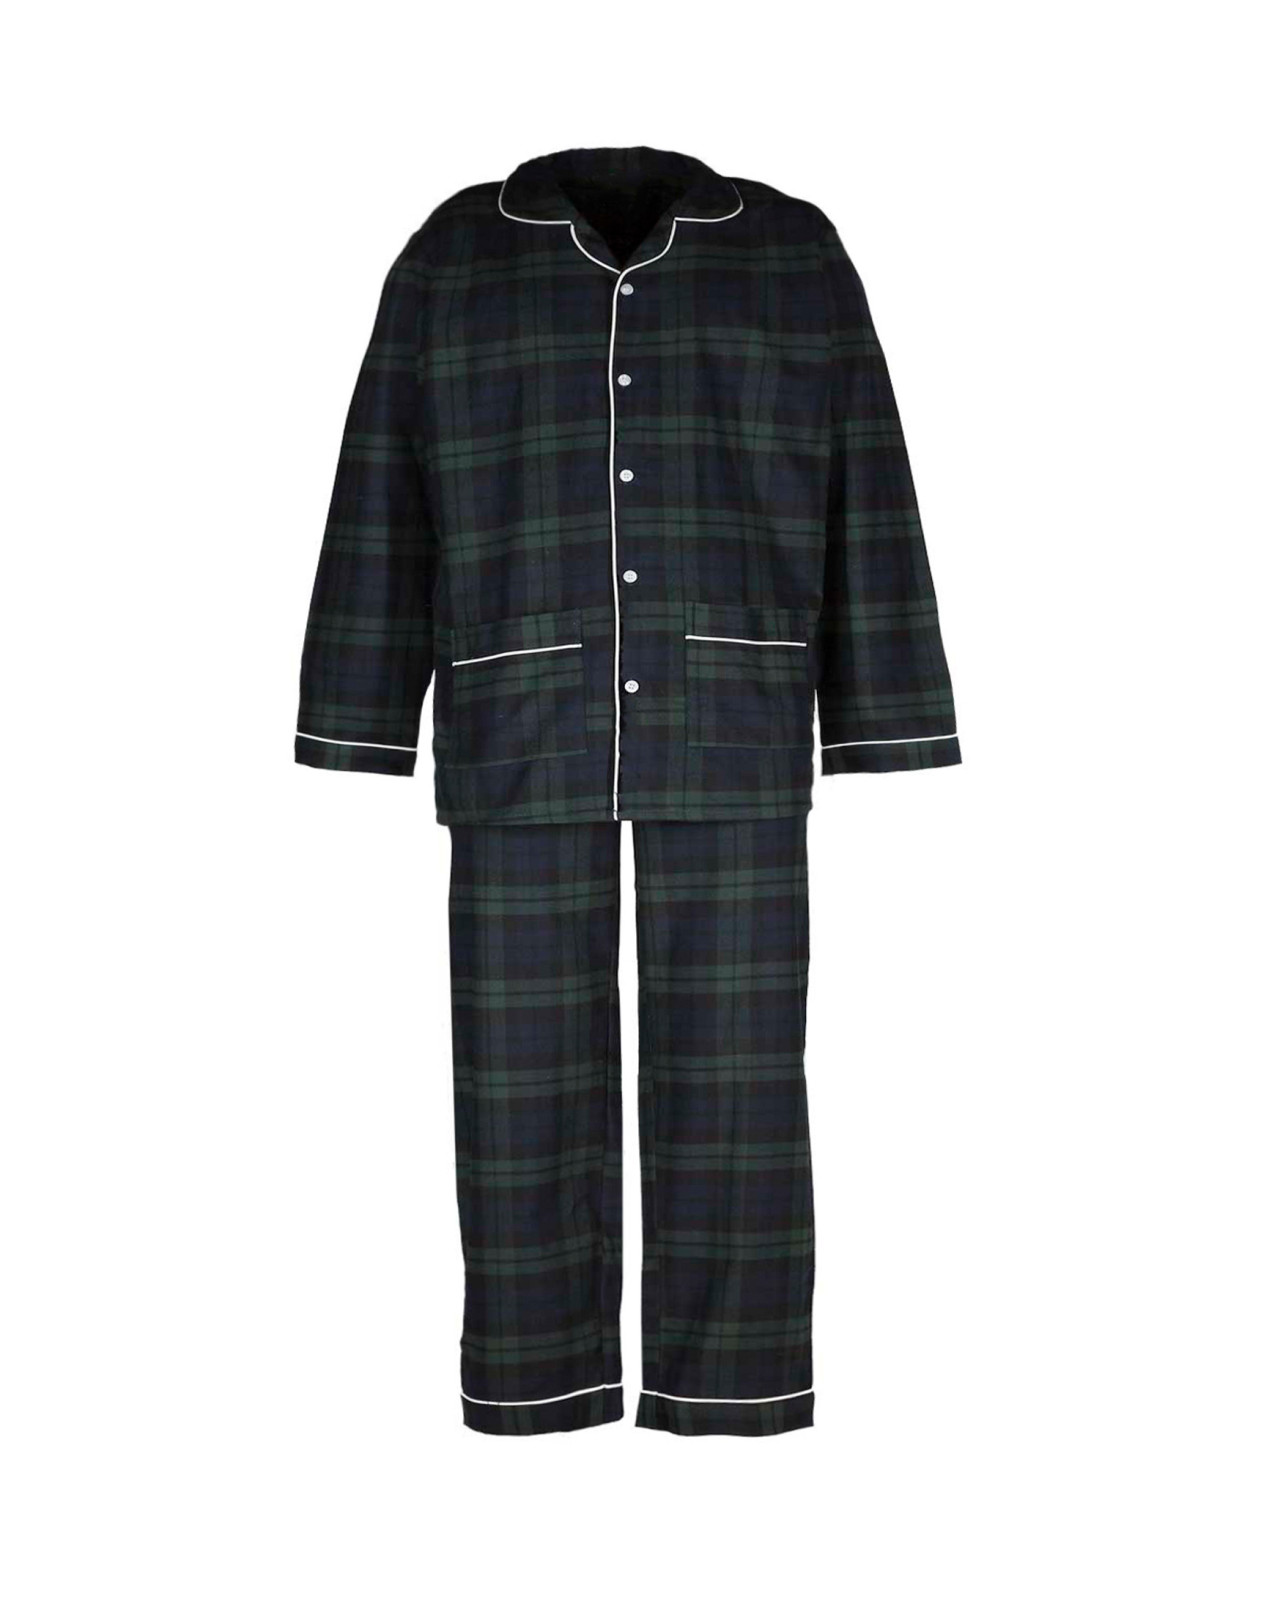 Boy Pajamas in navy and green plaid 100% cotton flannel.